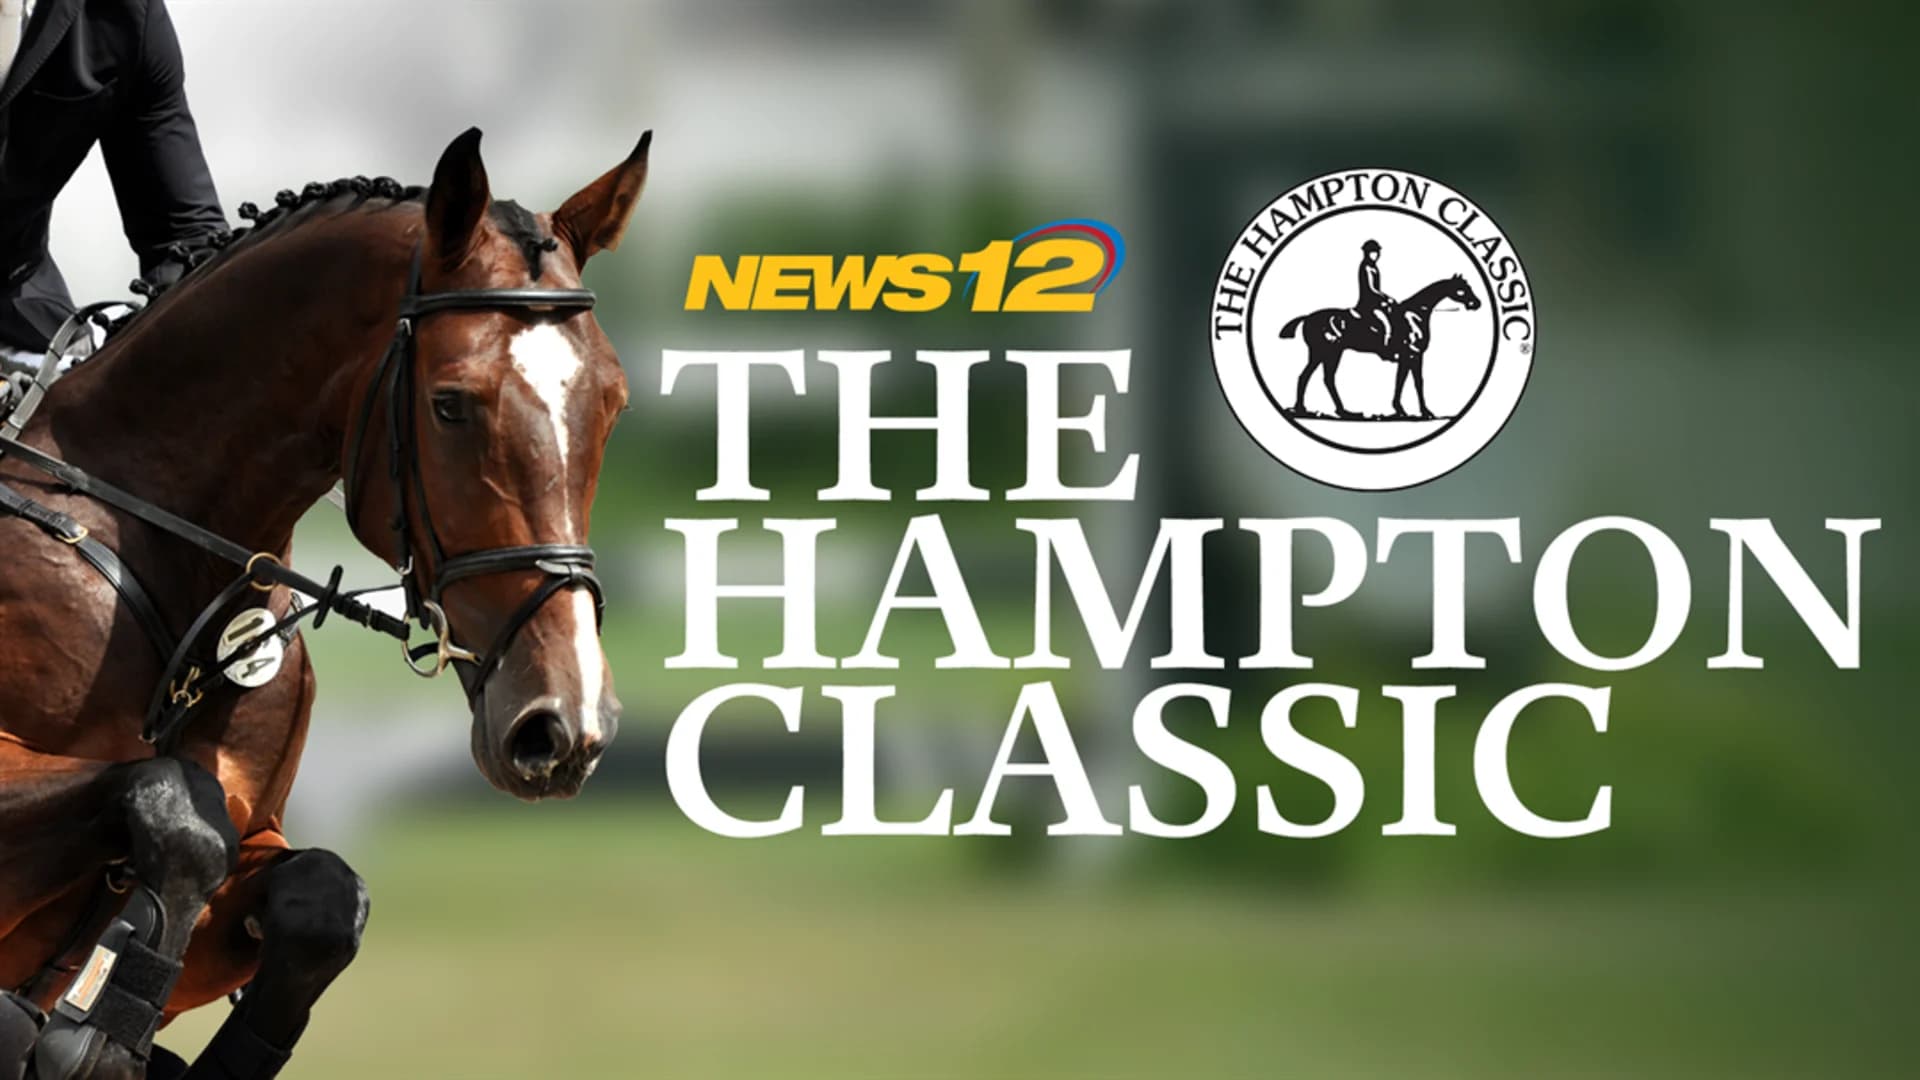 Highlights from the Hampton Classic